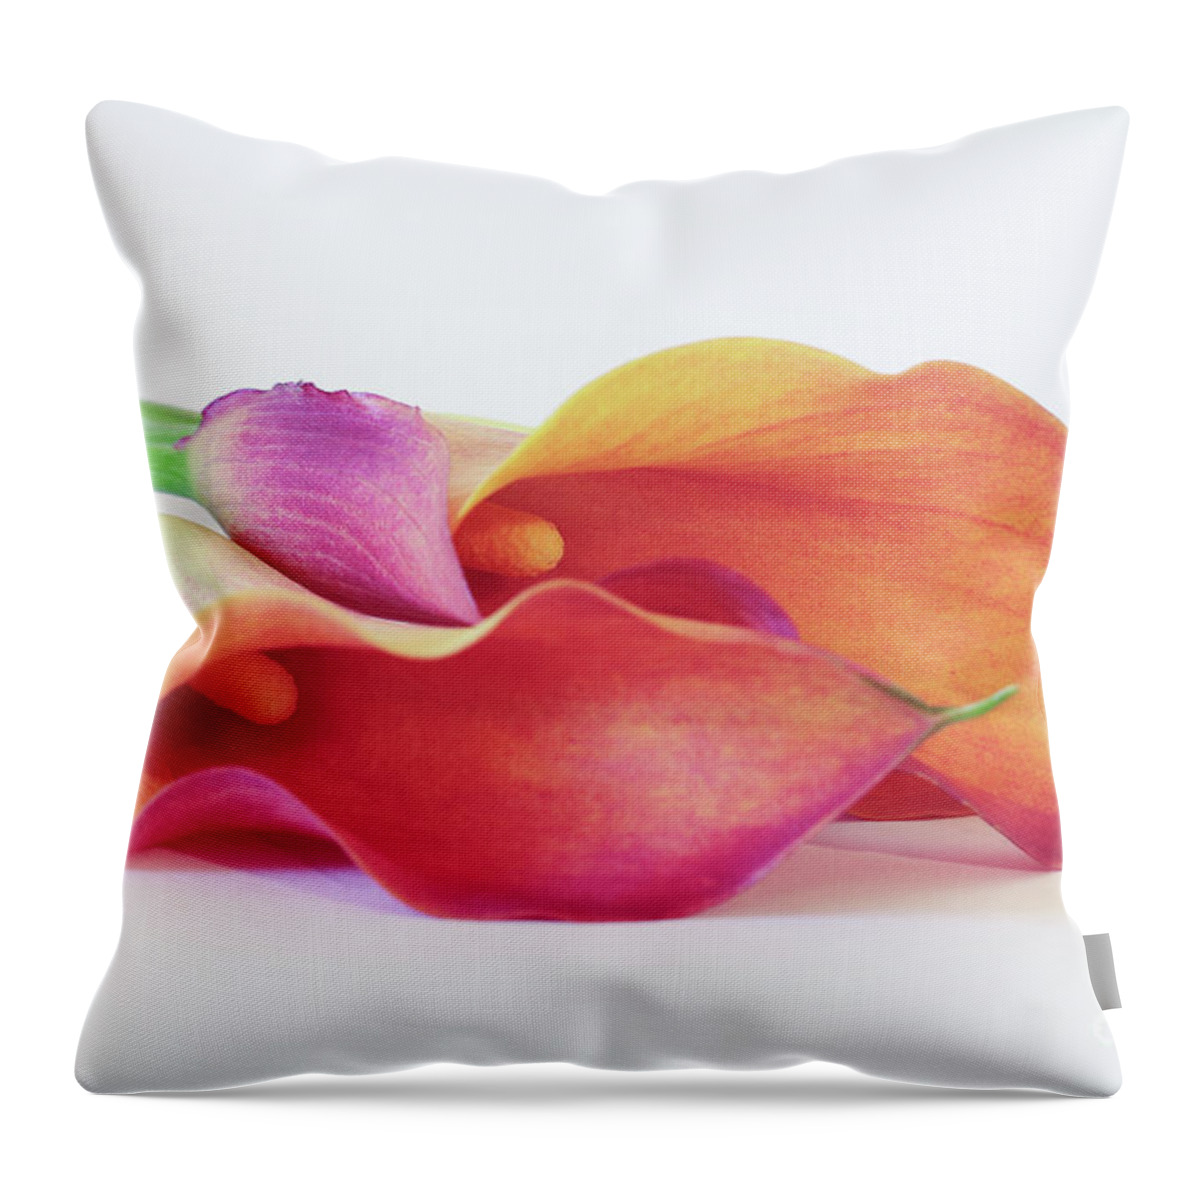 Flowers Throw Pillow featuring the photograph Exquisite by Design by Anita Oakley